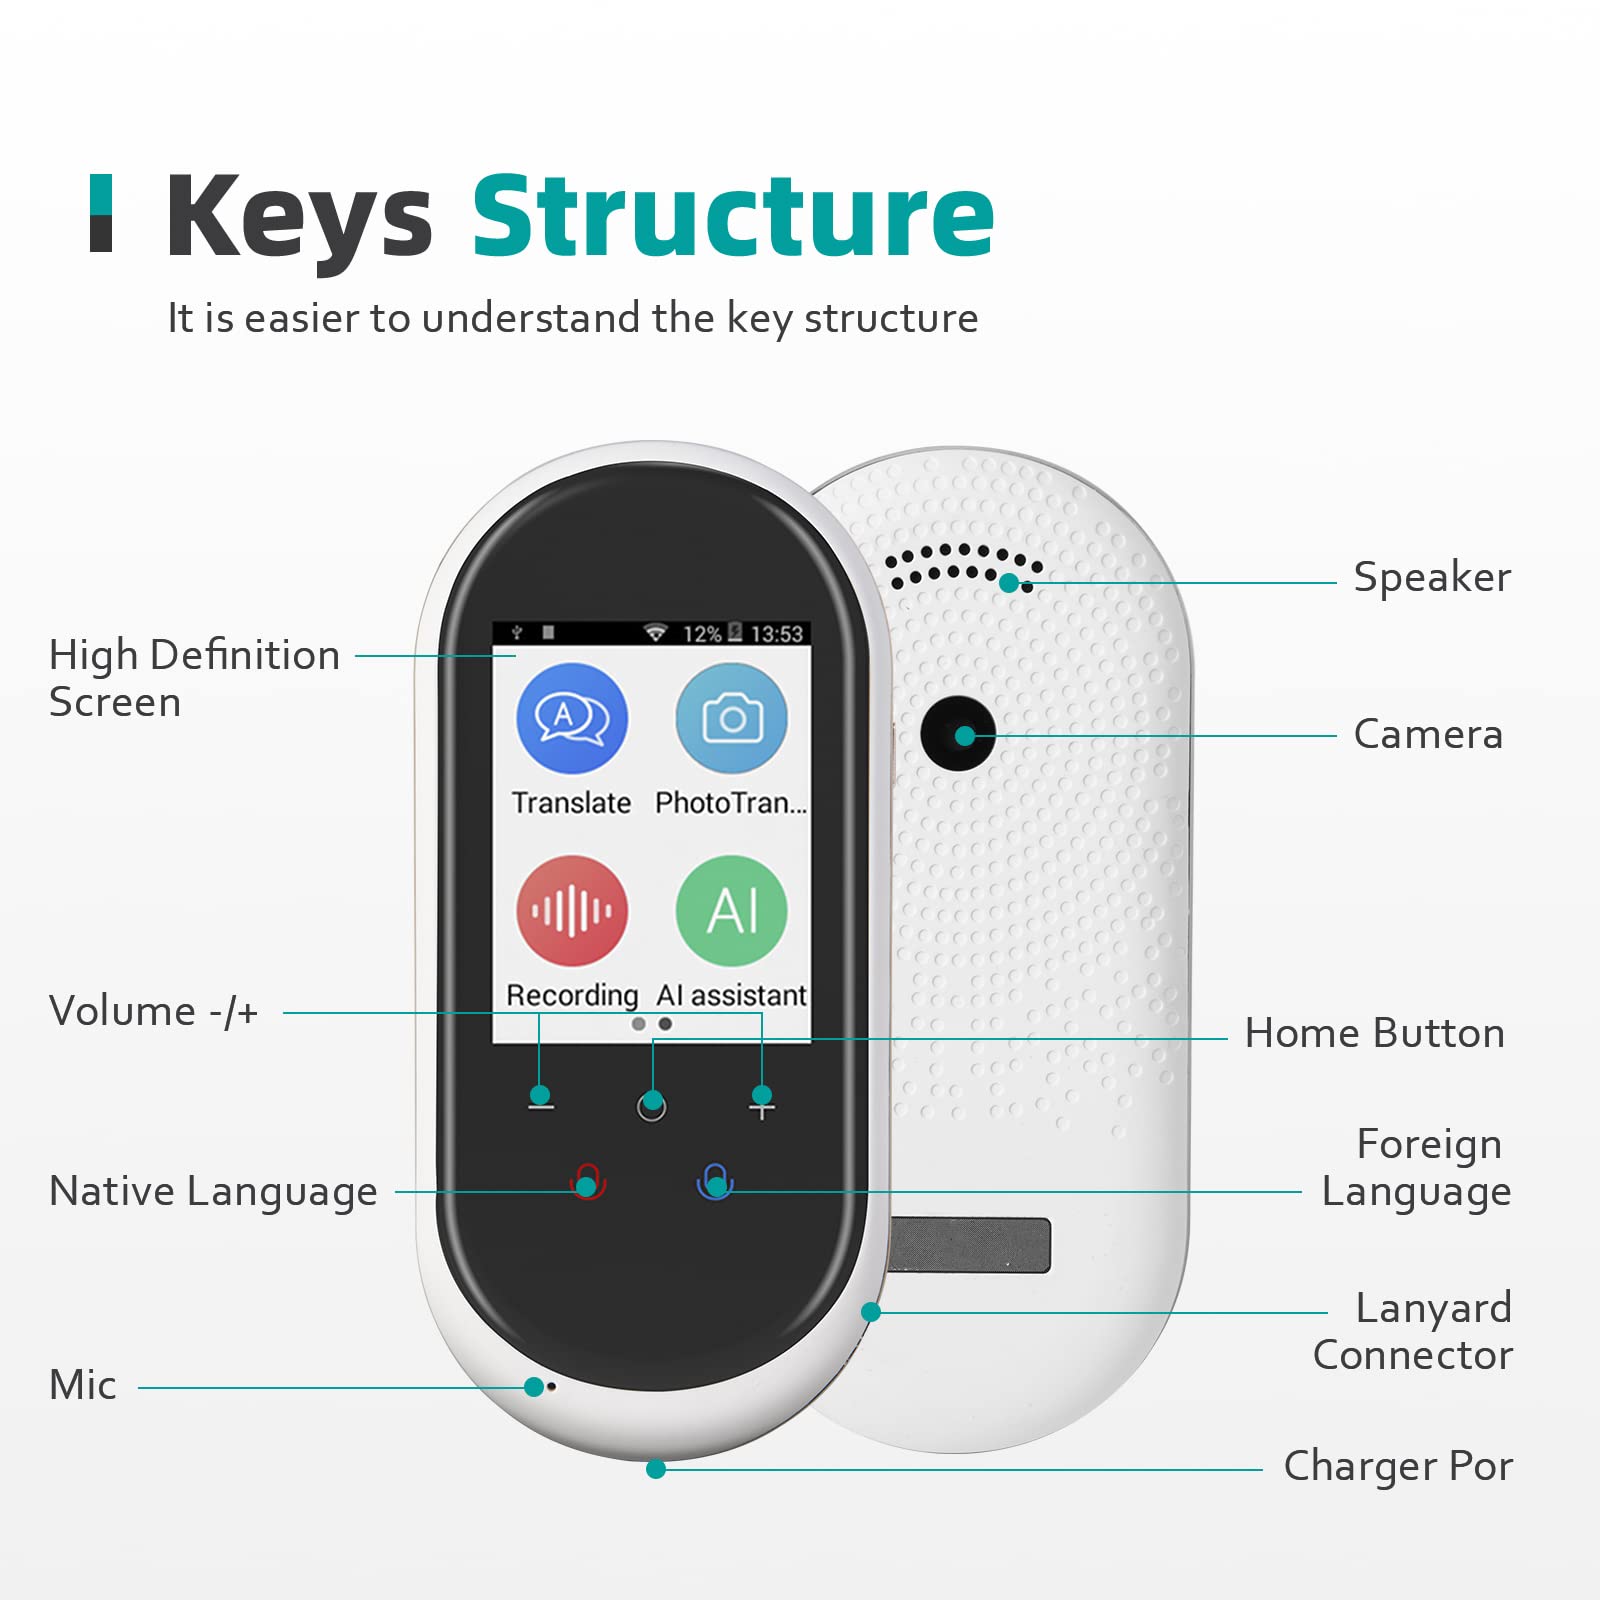 Language Translator Device Two-Way Instant Translator Device 106 Languages Support Voice & Text & Offline & Photo Translation High Accuracy Voice Translator Device for Travel Learning Business